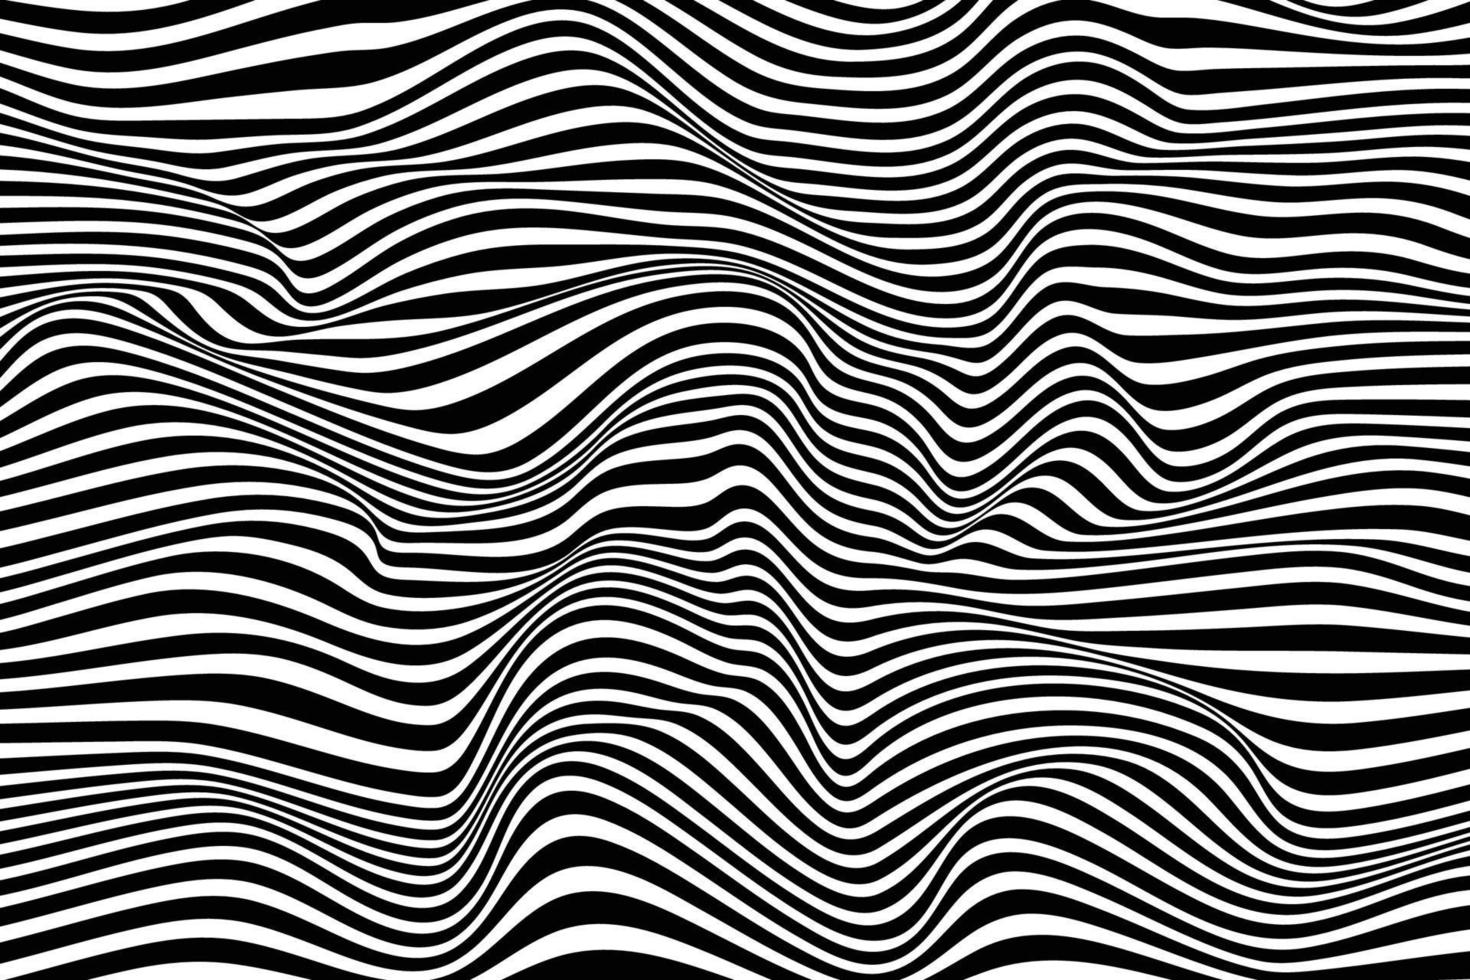 Abstract striped sea illustration. Digital optical illusion design. Trendy black and white wave background vector